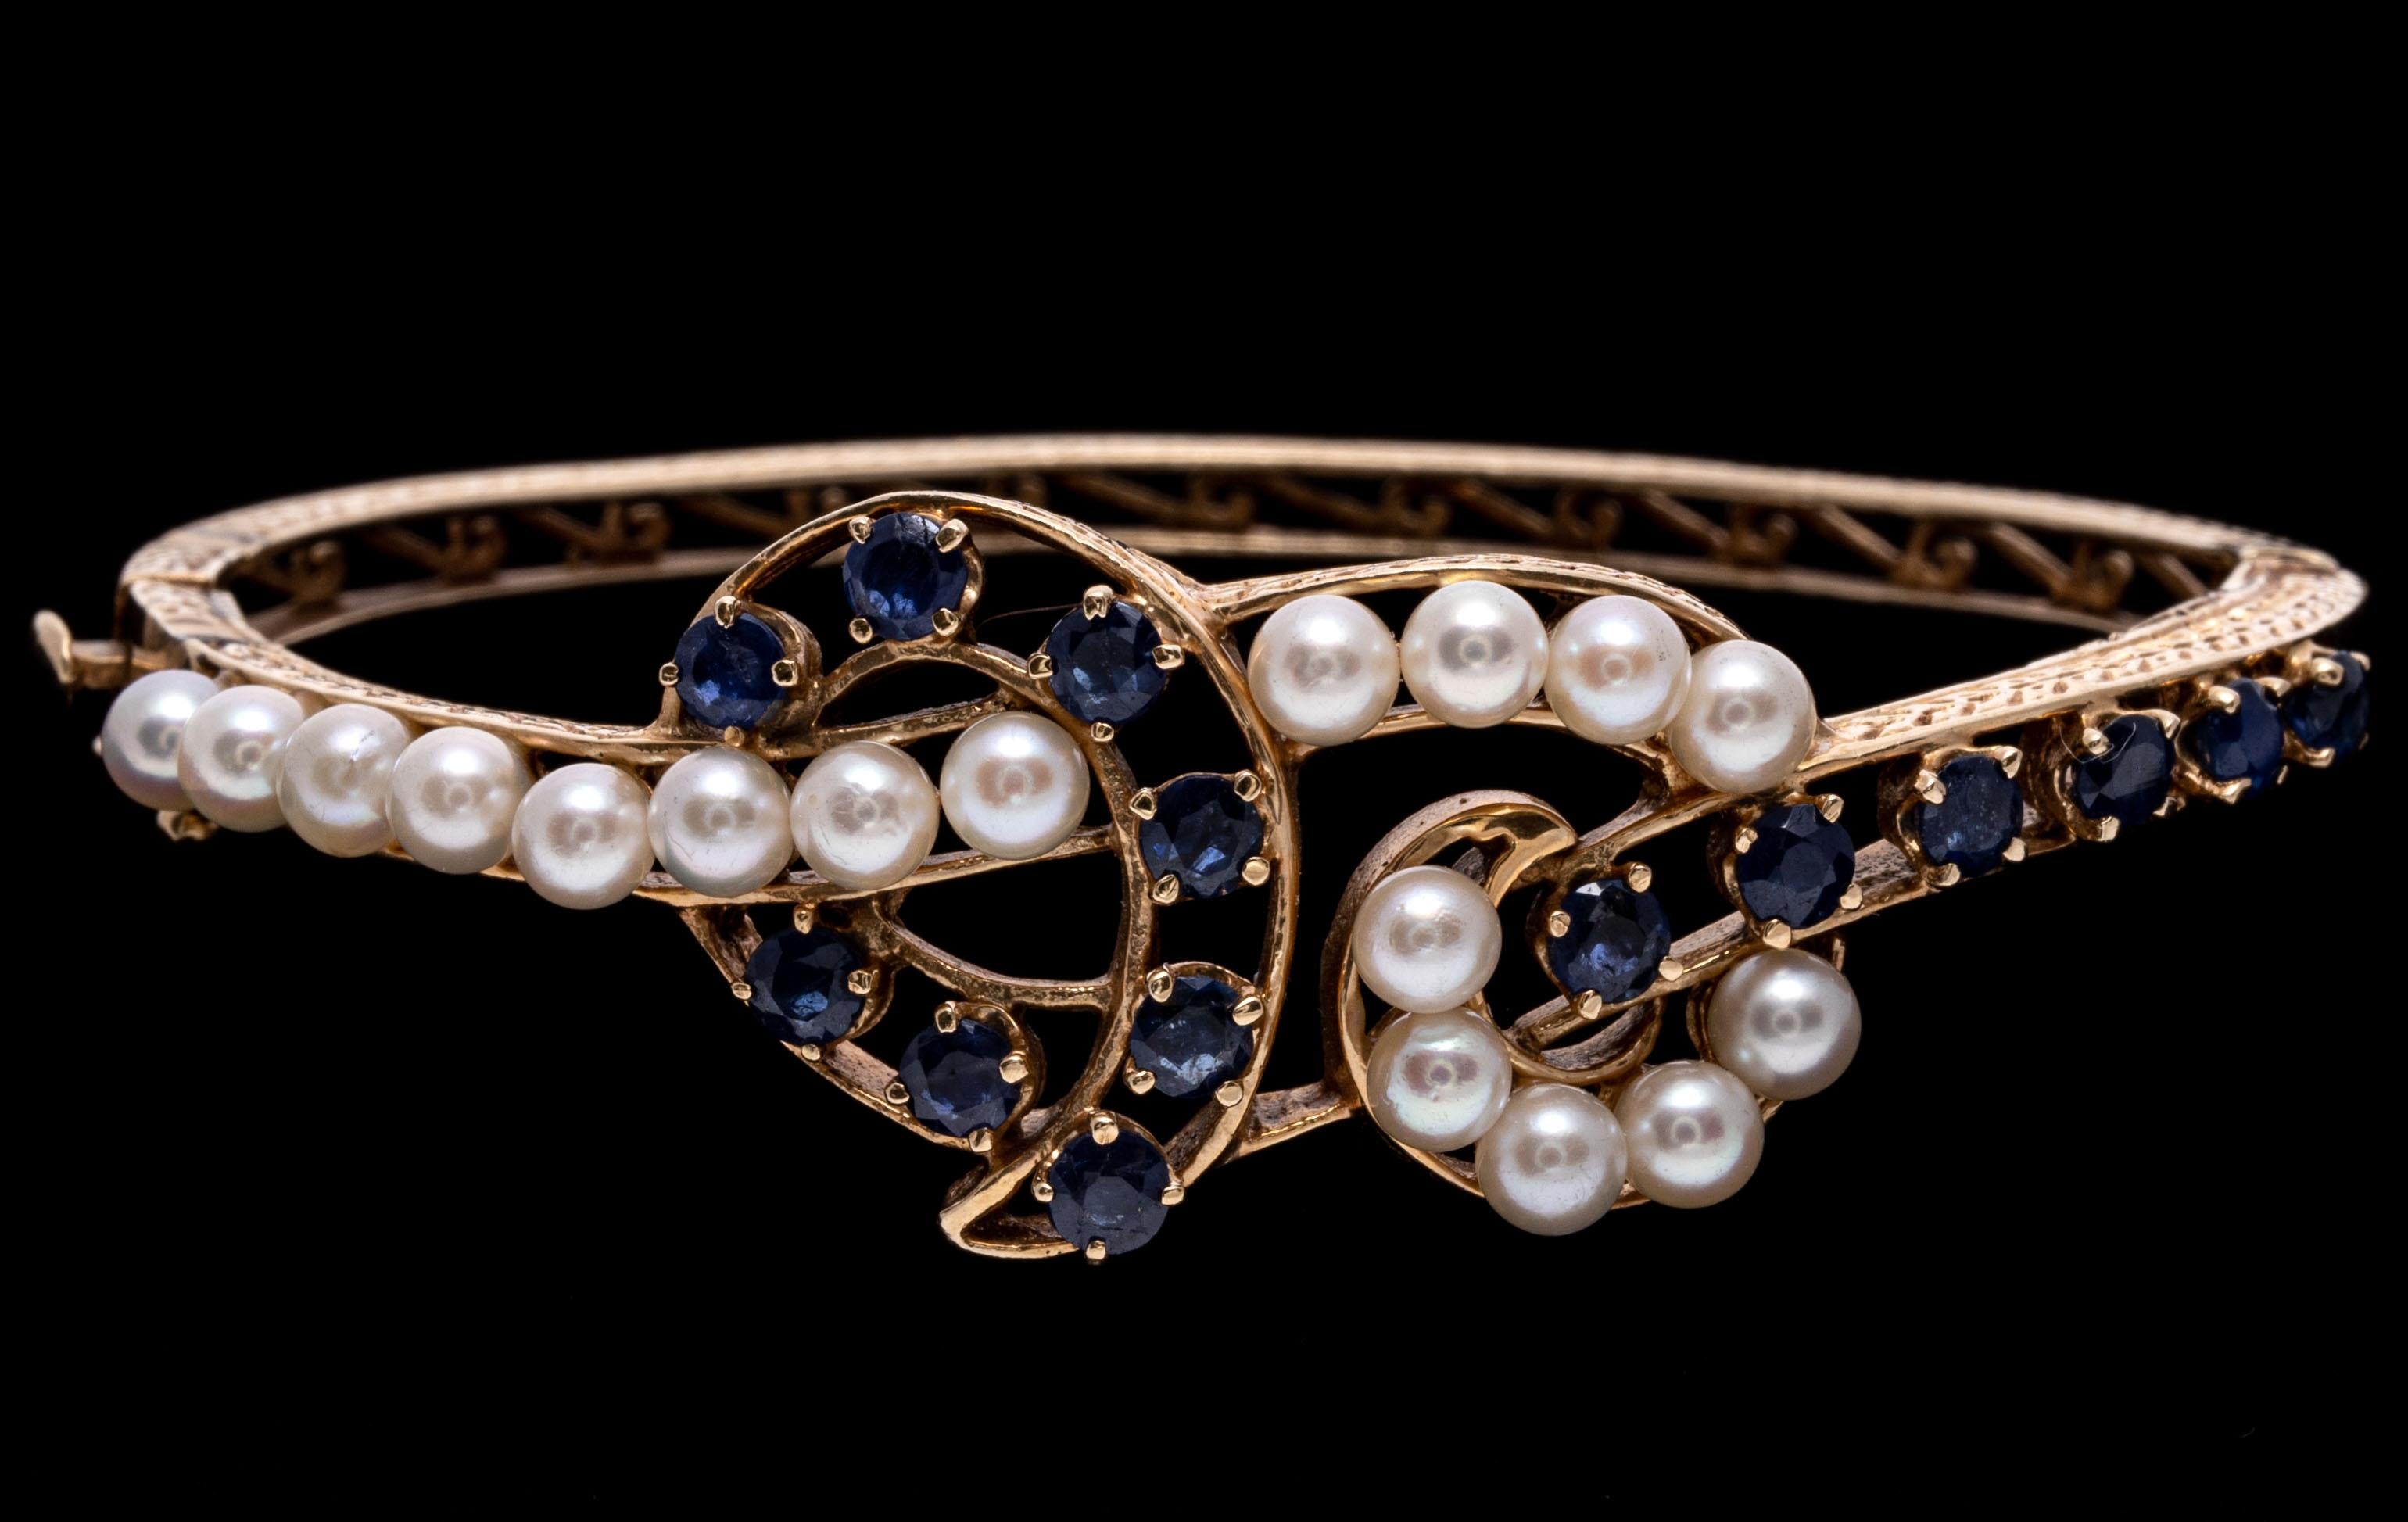 14K Gold, Sapphire and Cultured Pearl Knot Motif Bangle Bracelet For Sale 2